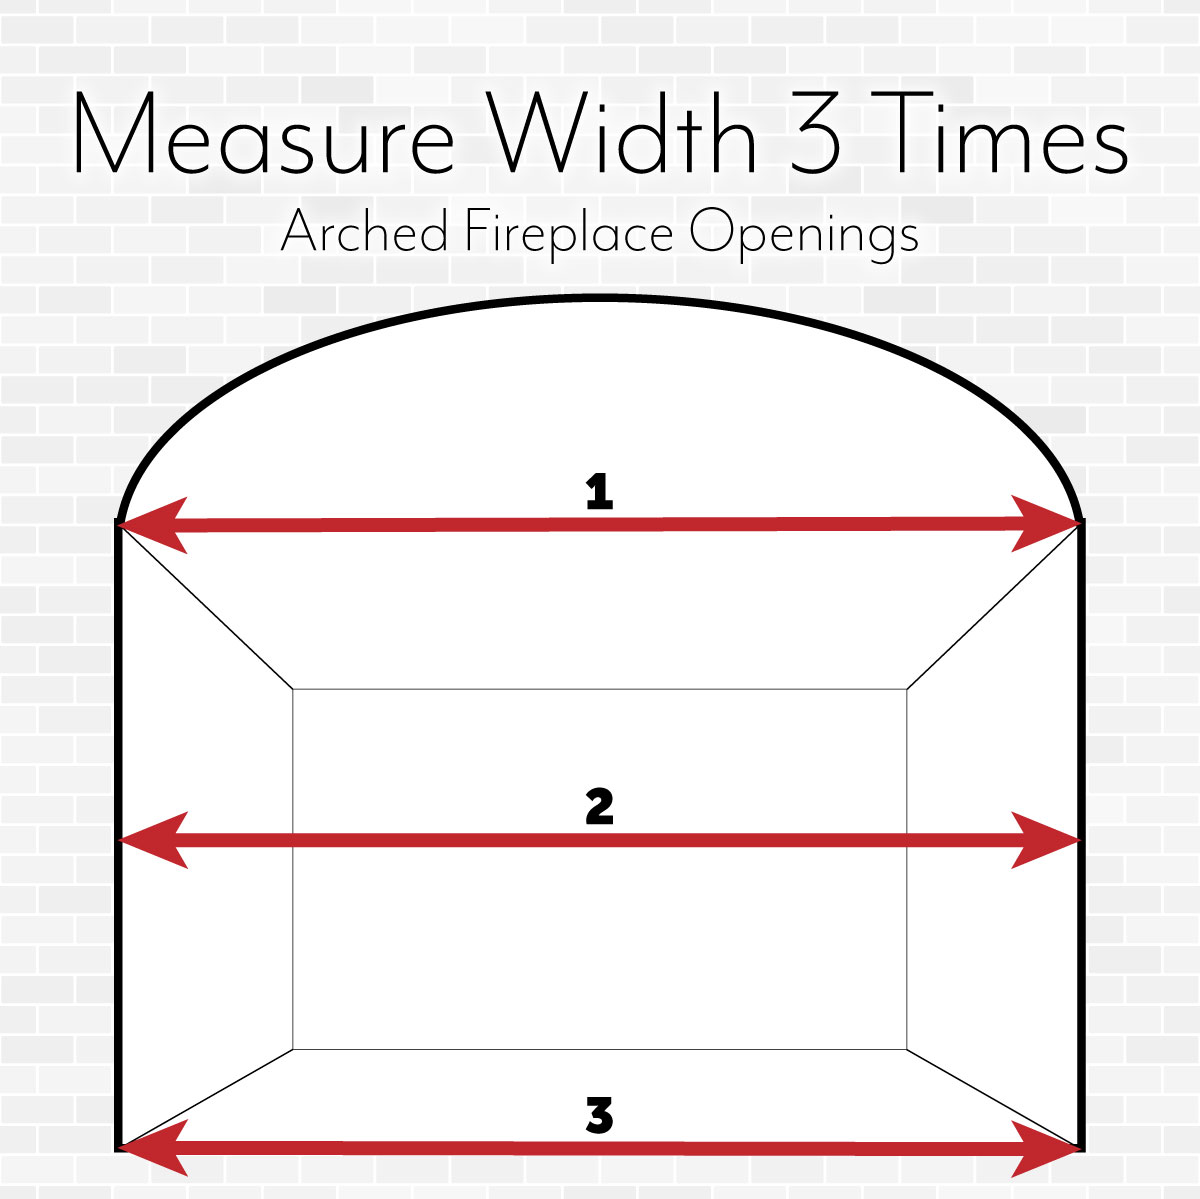 How to Measure Your Arched Fireplace Door Width